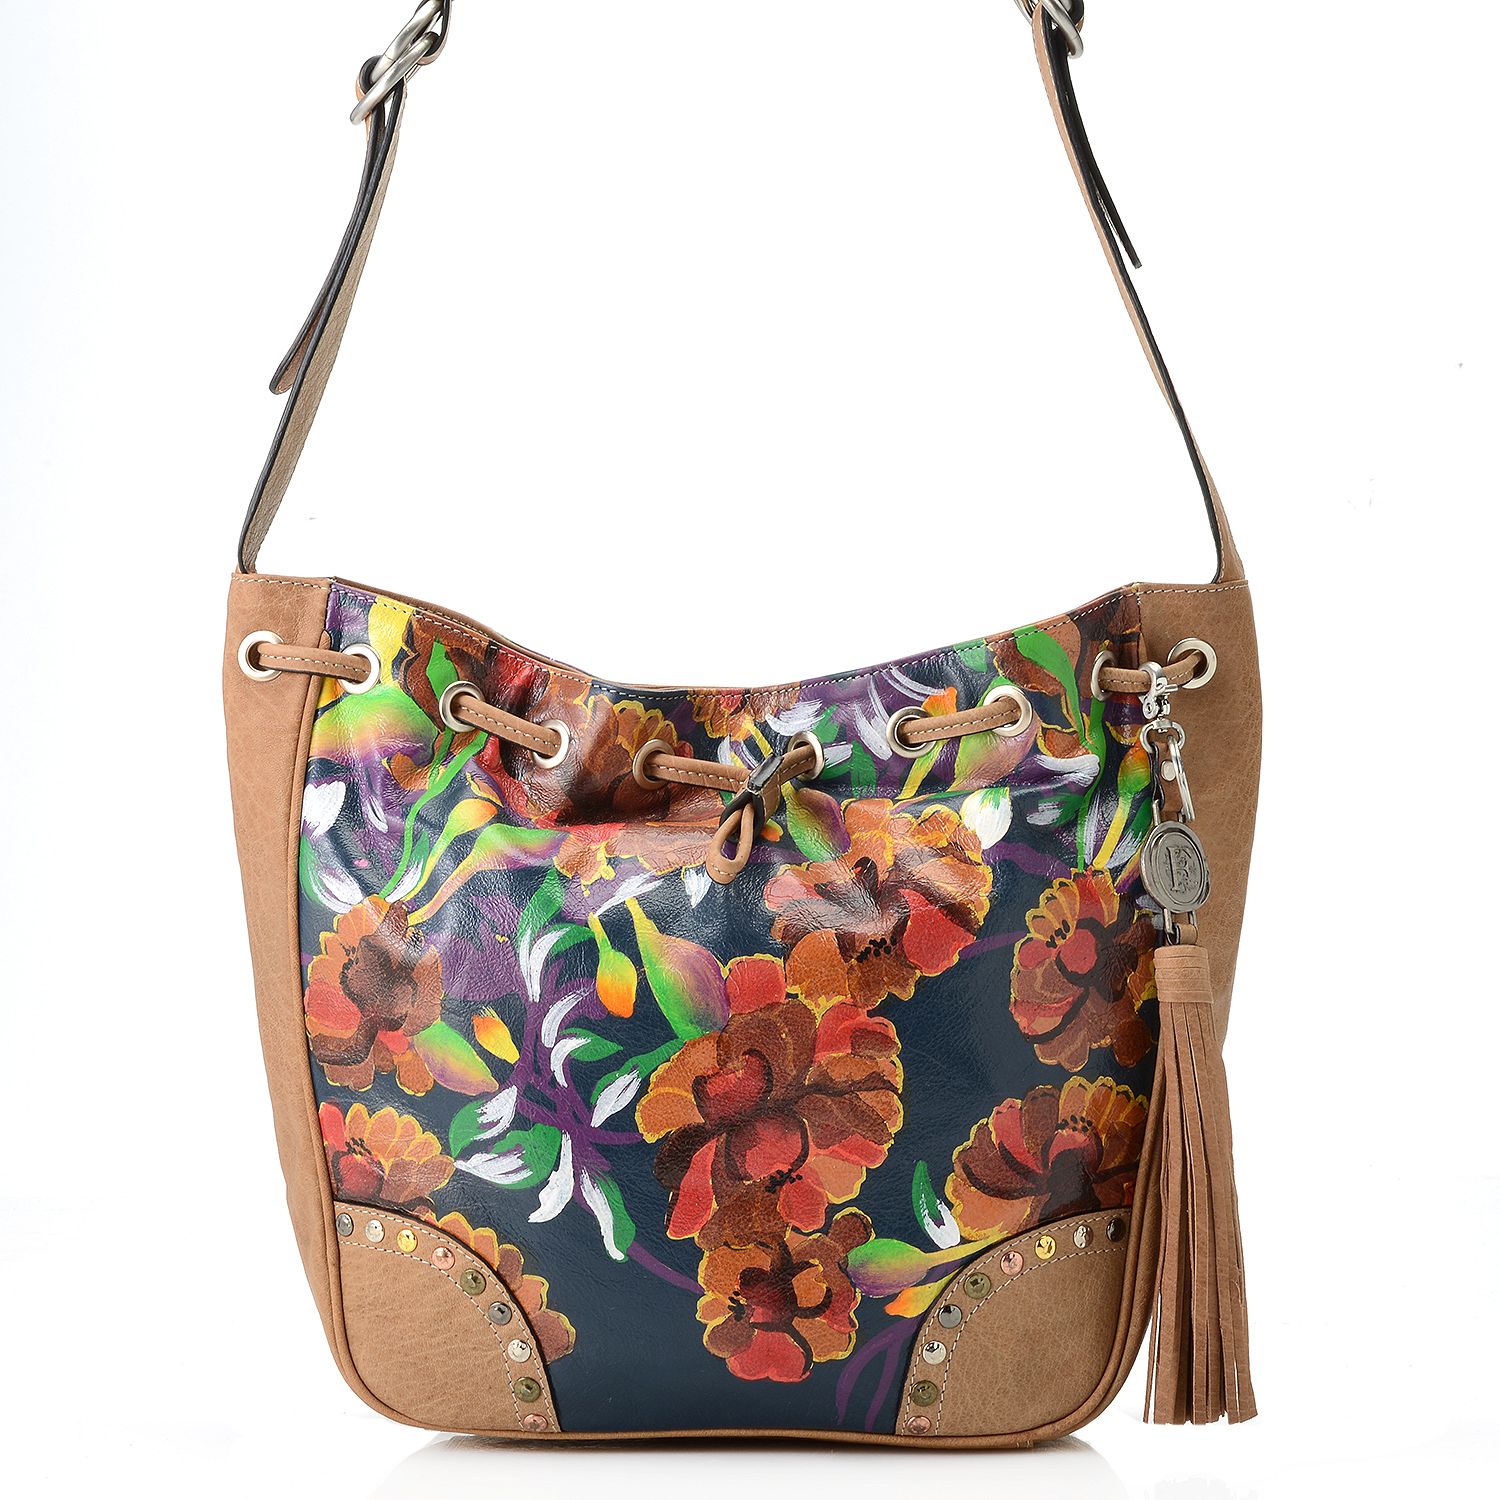 732-111- Firenze Bella "Amelia" Painted Leather Convertible Drawstring Bag